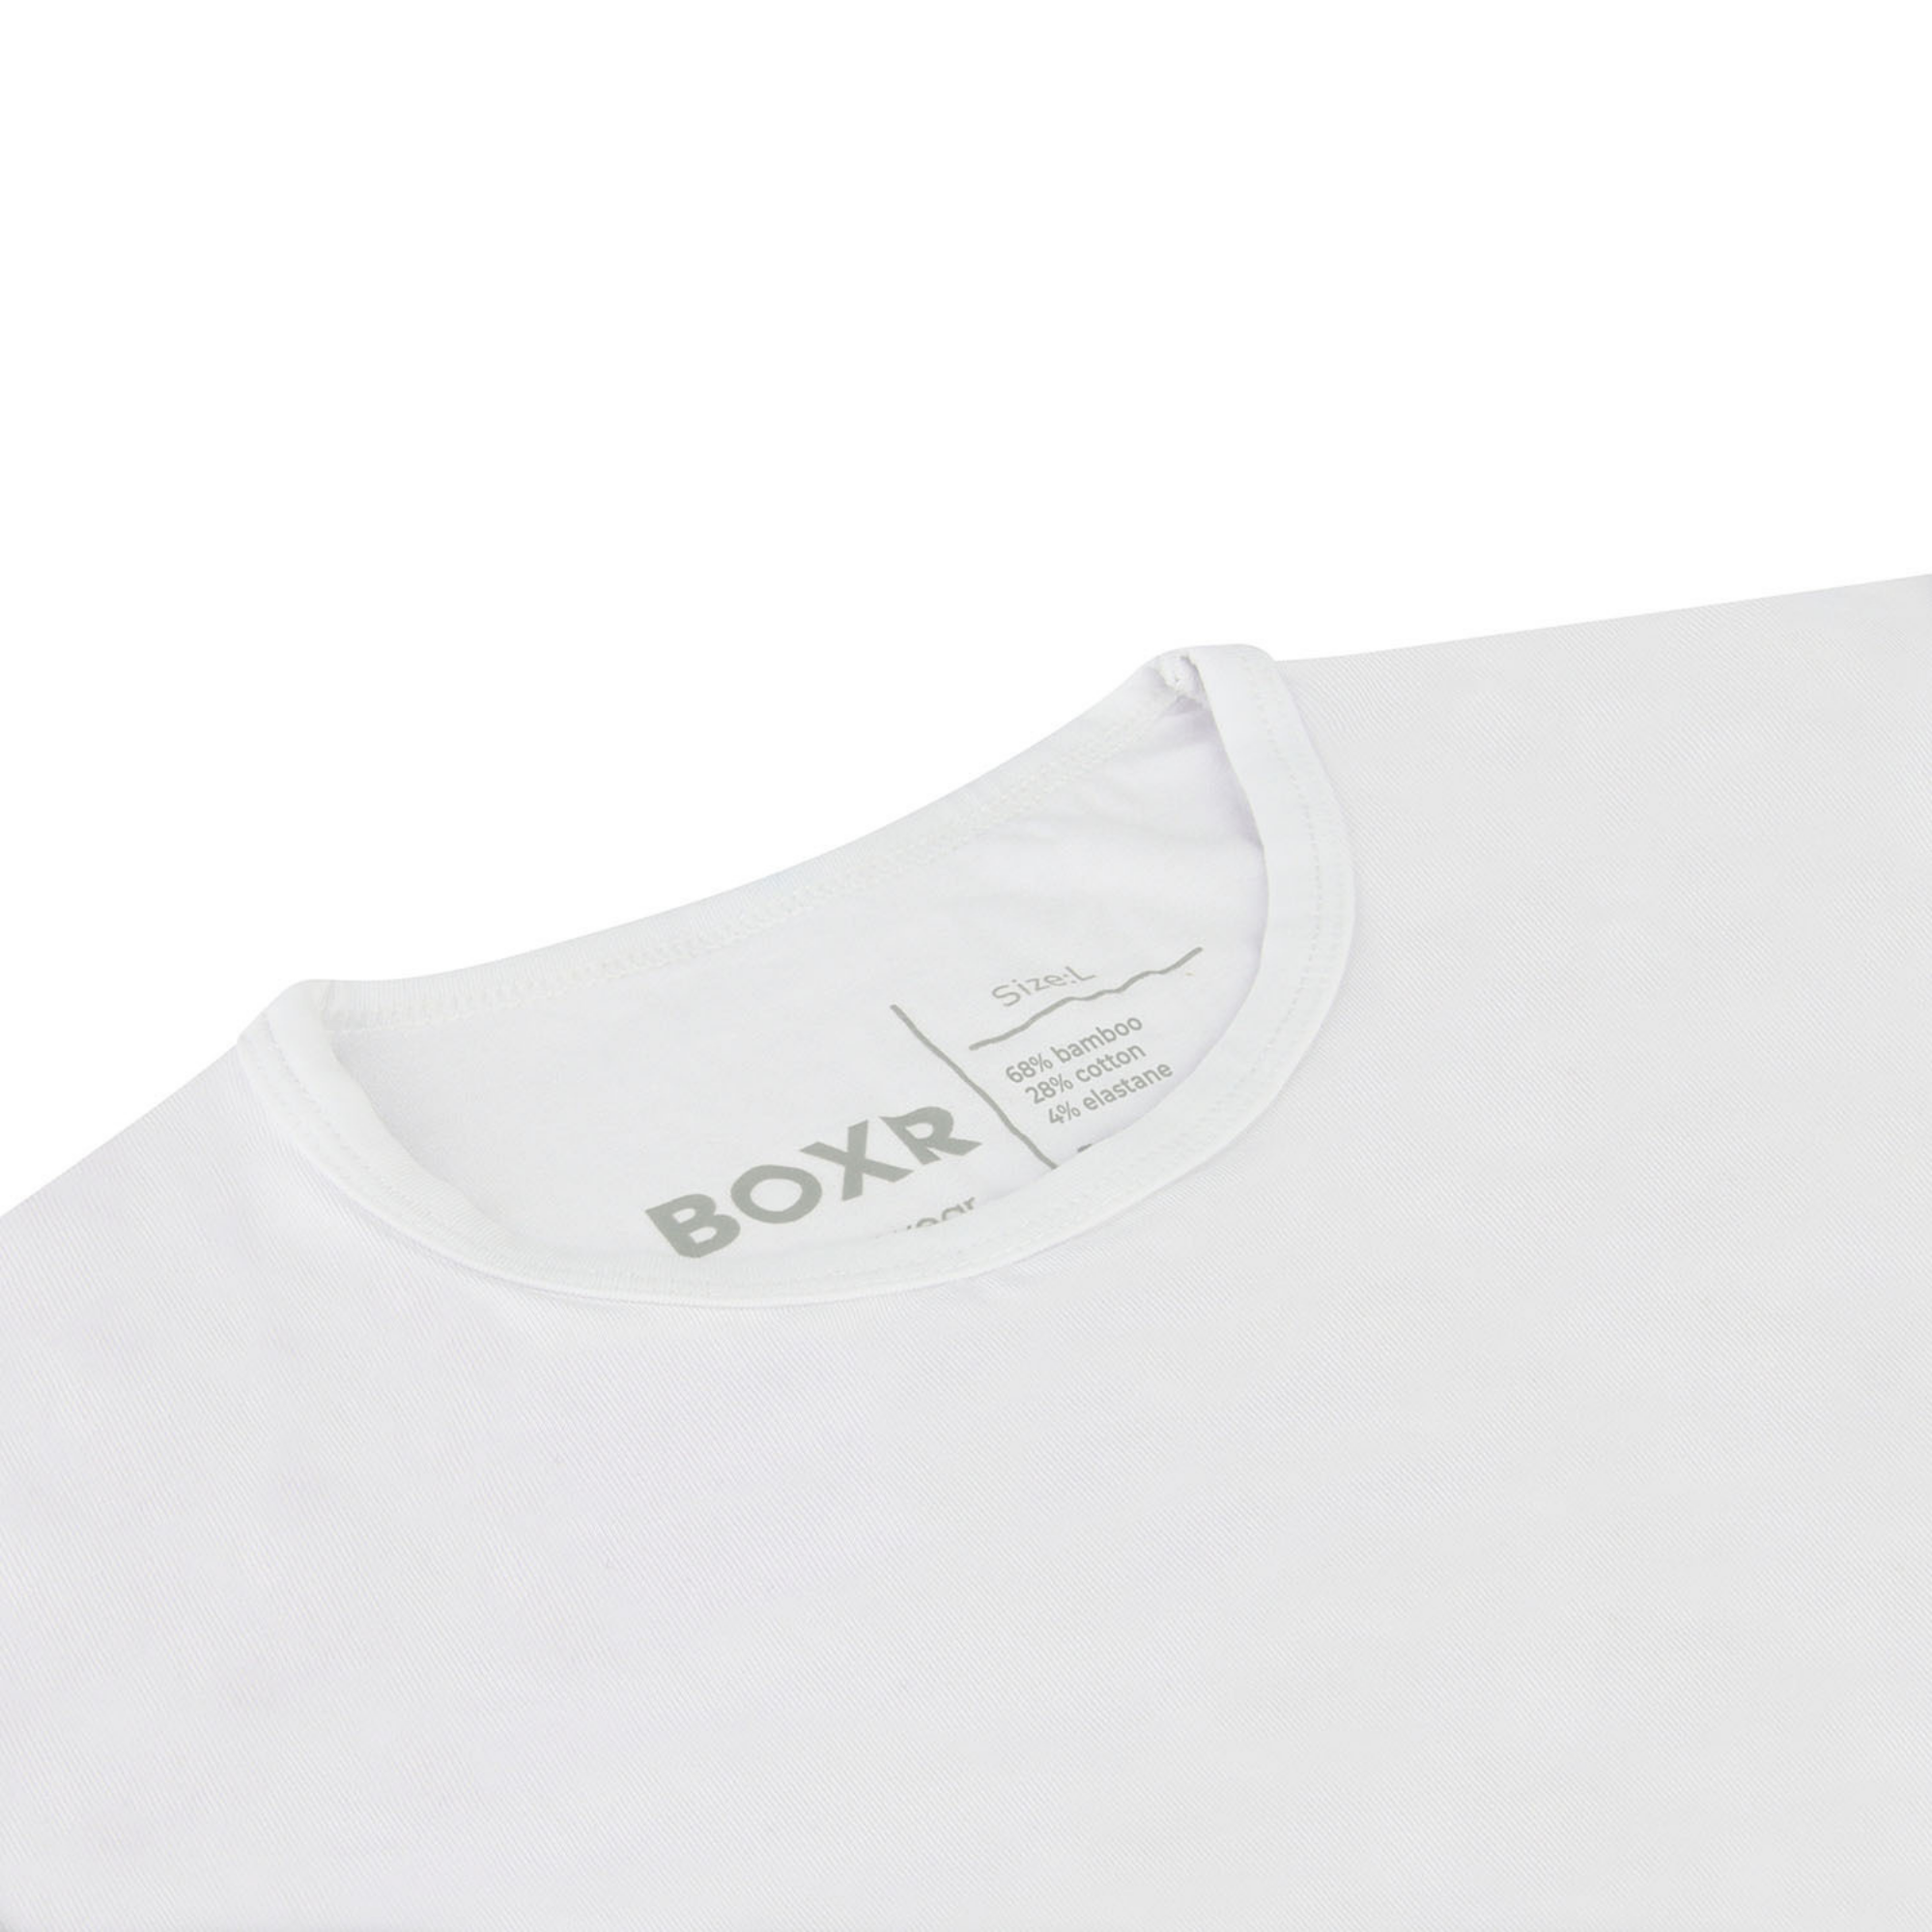 BOXR | Bamboe T-Shirt 2-Pack Wit